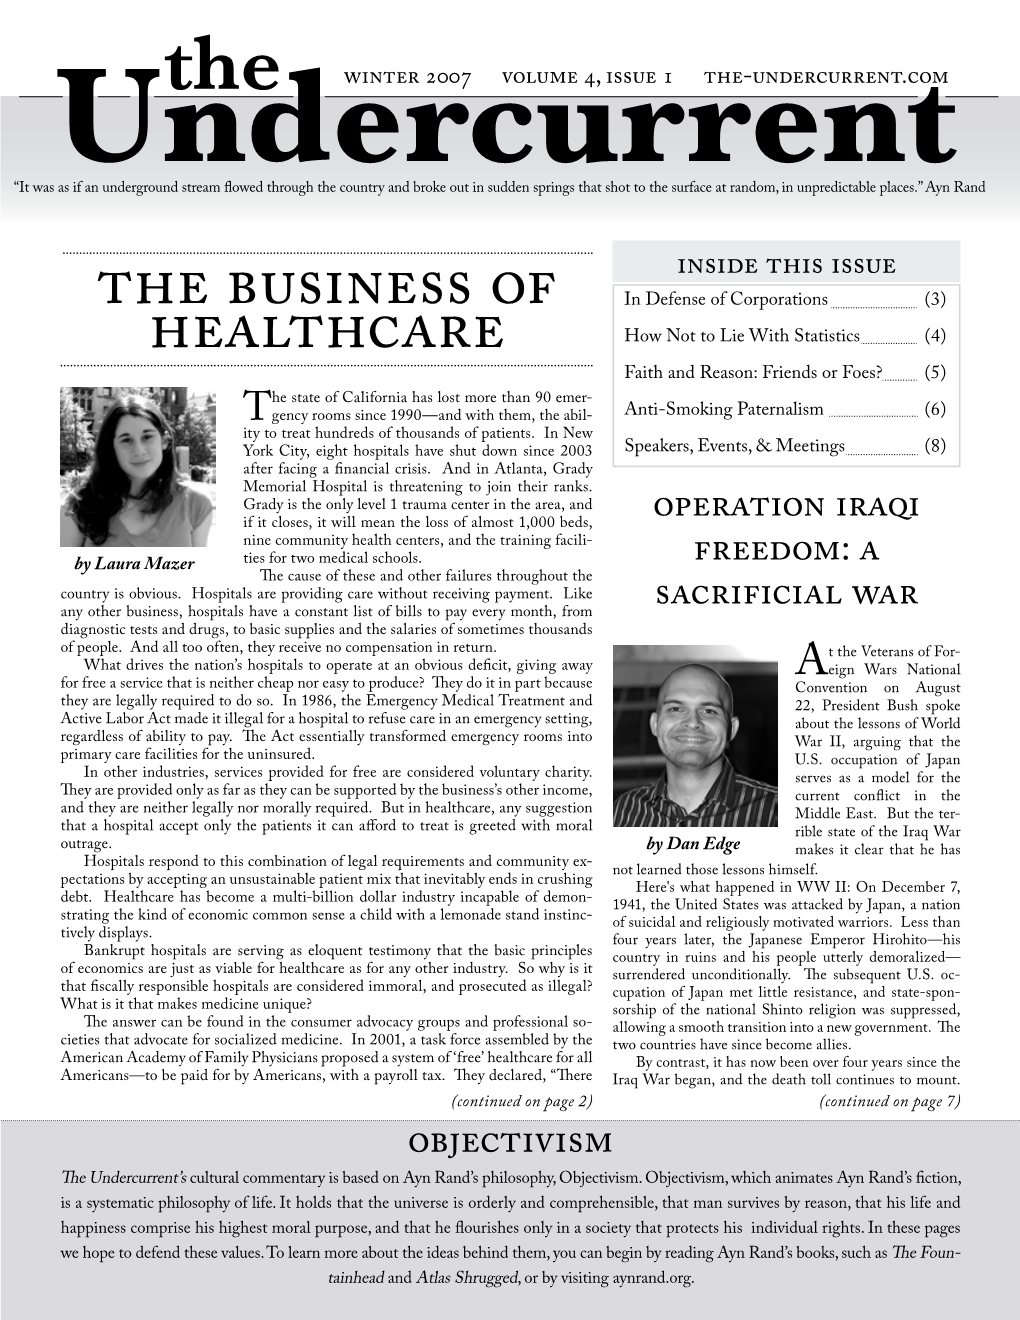 The Business of Healthcare the Undercurrent Continued from Page 1 Are a Set [Sic] of Basic Services That Free